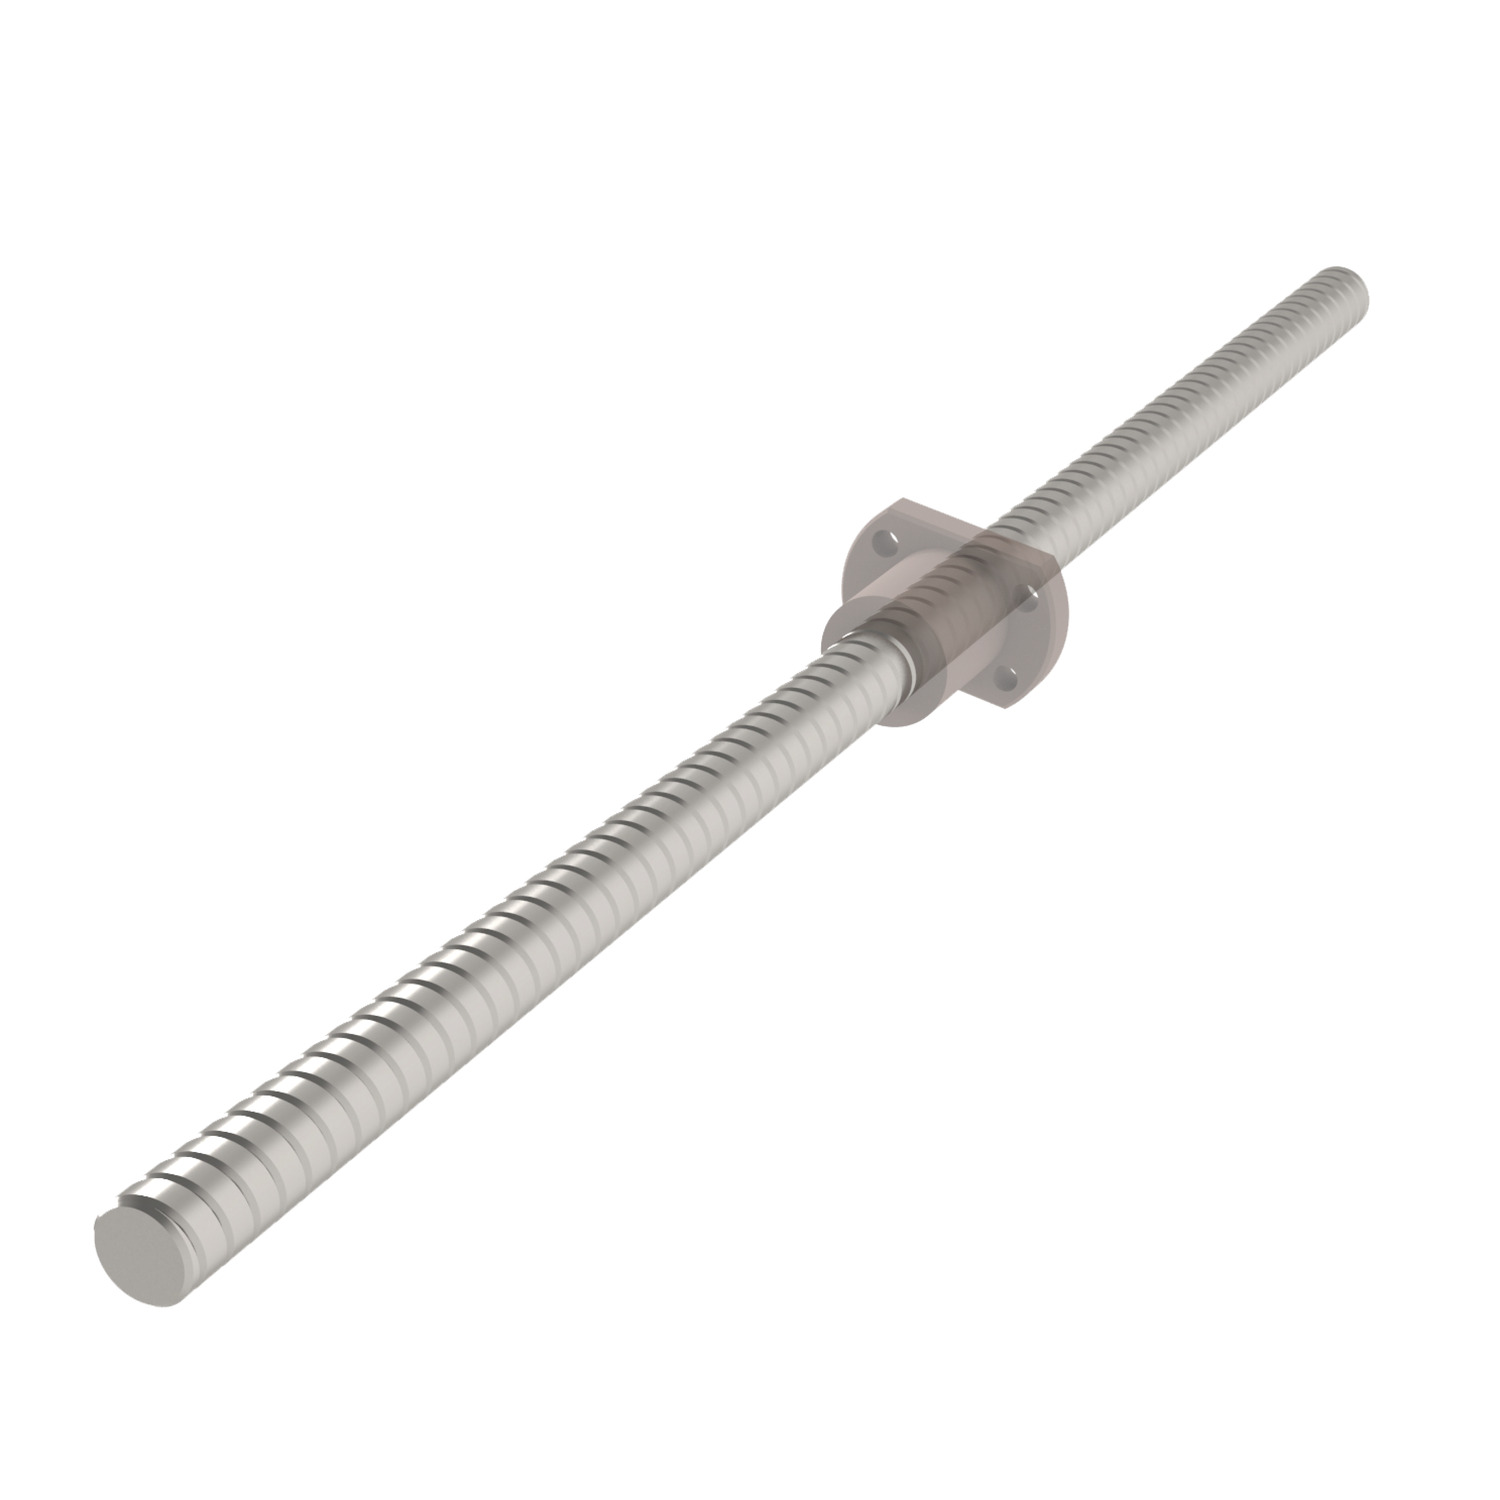 High Helix Lead Screws - Stainless Stainless steel, high precision lead screws. We are able to provide a wide range of diameters from 4 - 20mm. Screw only.